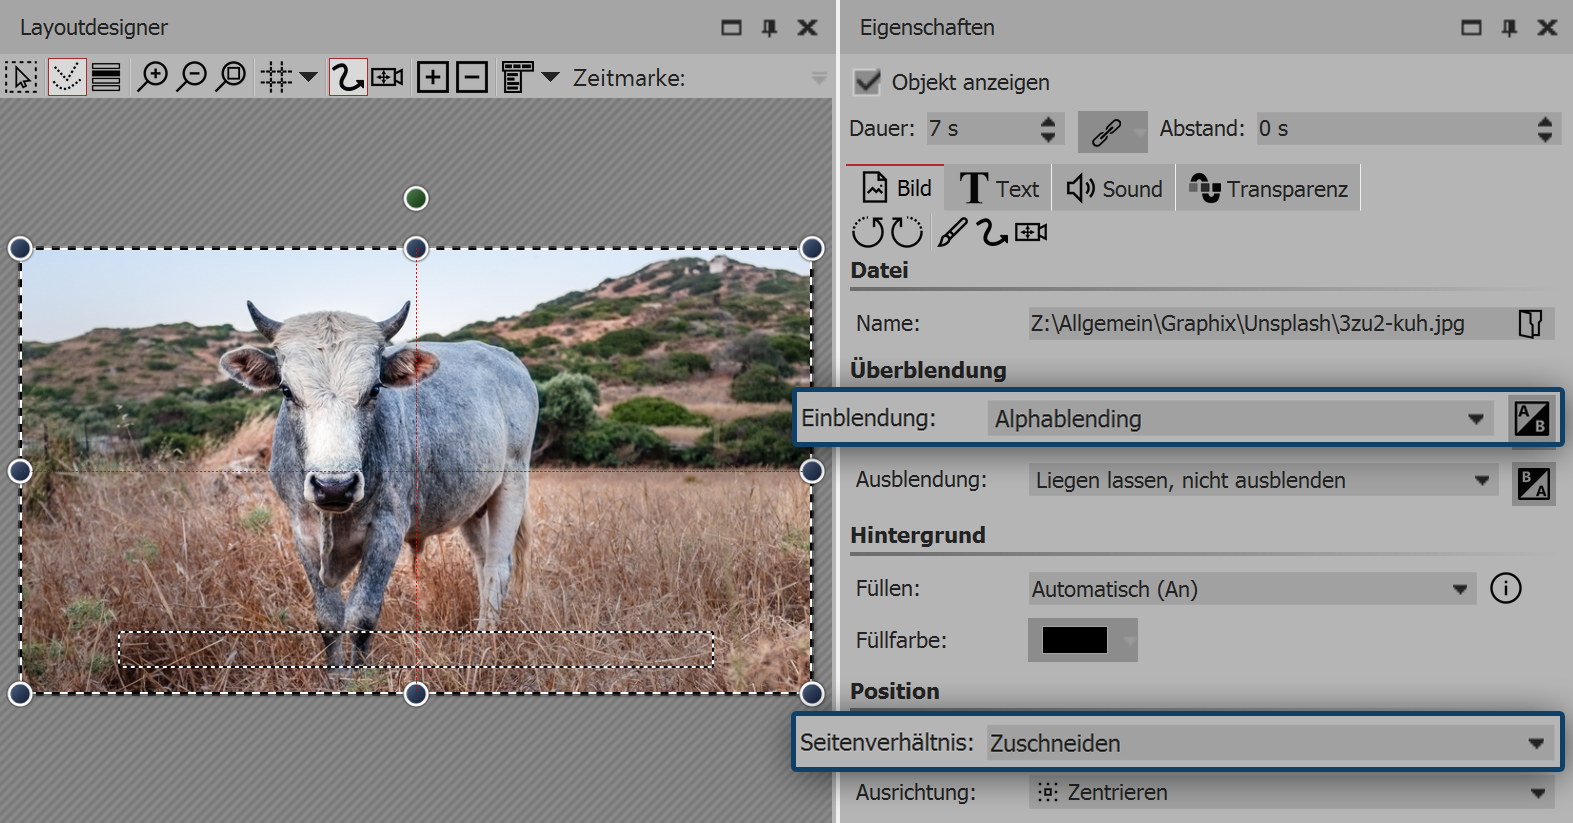 Settings for image in blur effect